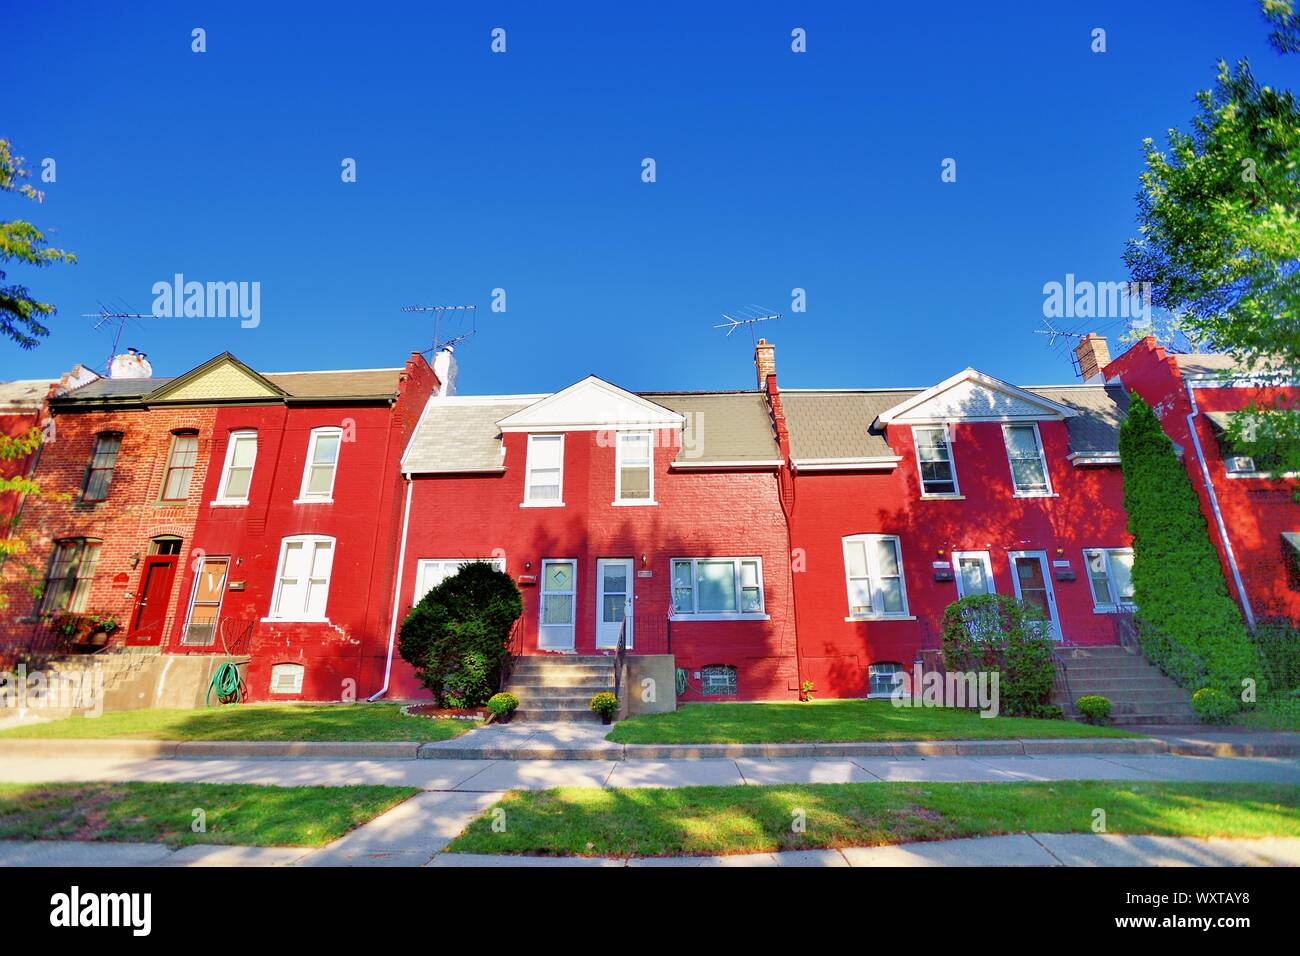 Chicago, Illinois, USA. A residential block of  homes in the National Historic District community of Pullman on the far South Side of Chicago. Stock Photo